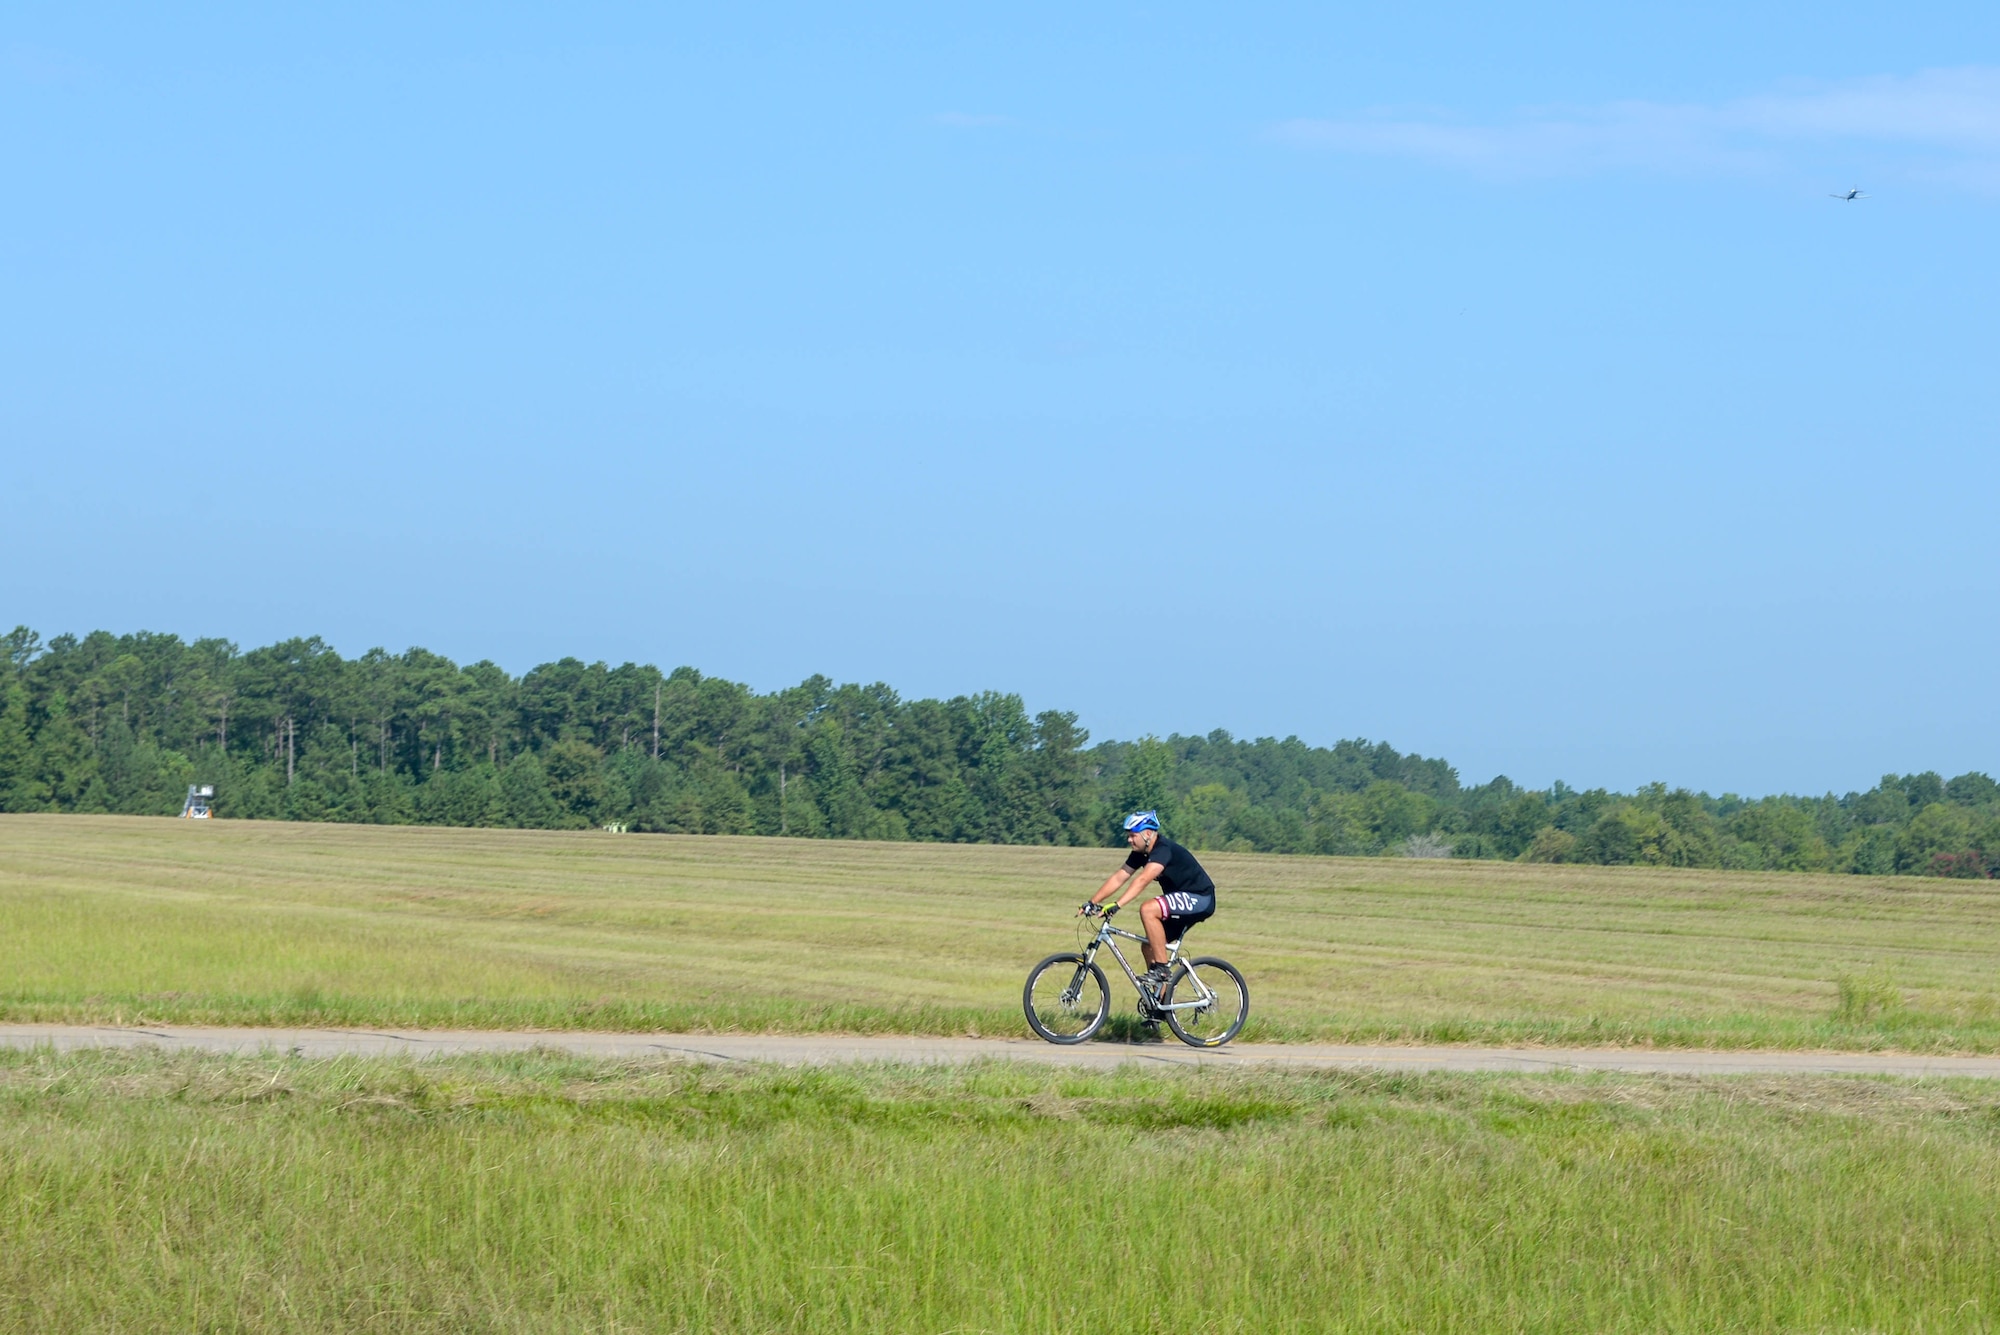 A person rides a bicycle on Perimeter Road on August 5, 2020, at Columbus Air Force Base, Miss. For cardio, Quinten Floyd, Columbus AFB fitness director, suggested base members use the BLAZE Fitness Trail and Perimeter Road. (U.S. Air Force photo by Airman 1st Class Davis Donaldson)